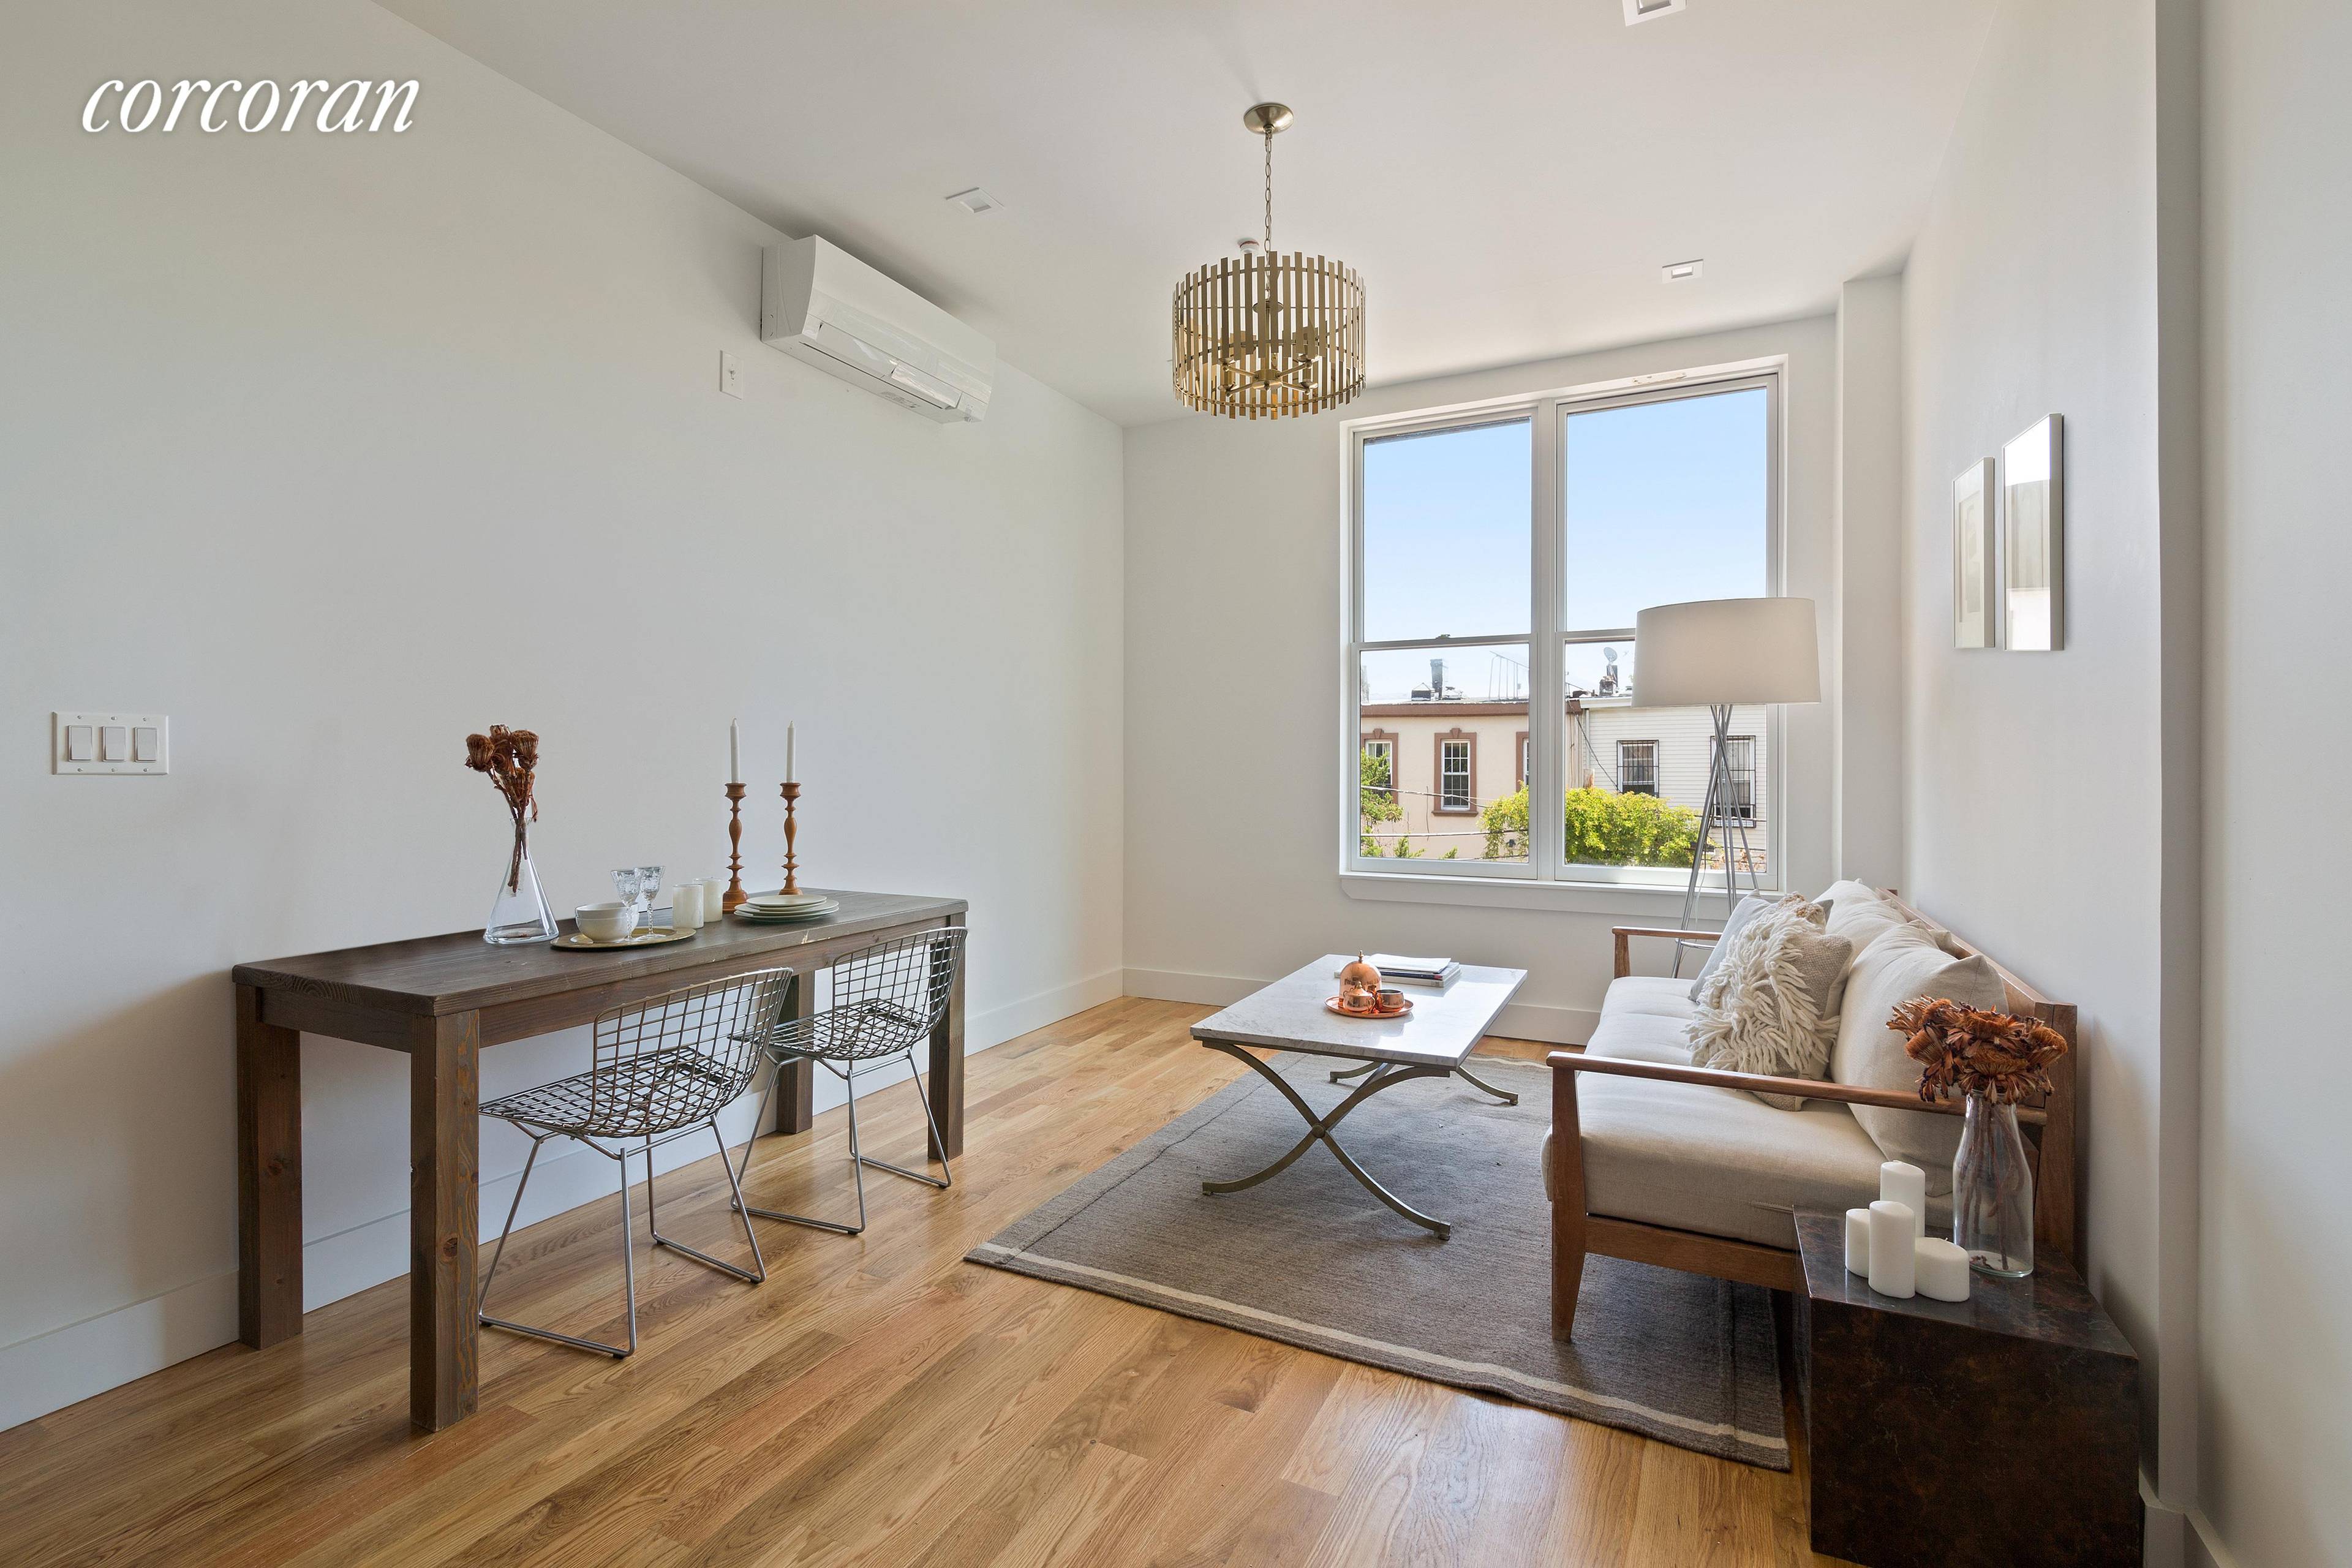 Welcome to 900 Willoughby Ave, a 7 unit boutique condo conversion located in the heart of prime Bushwick, offering a mix of studio and one and two bedroom layouts.